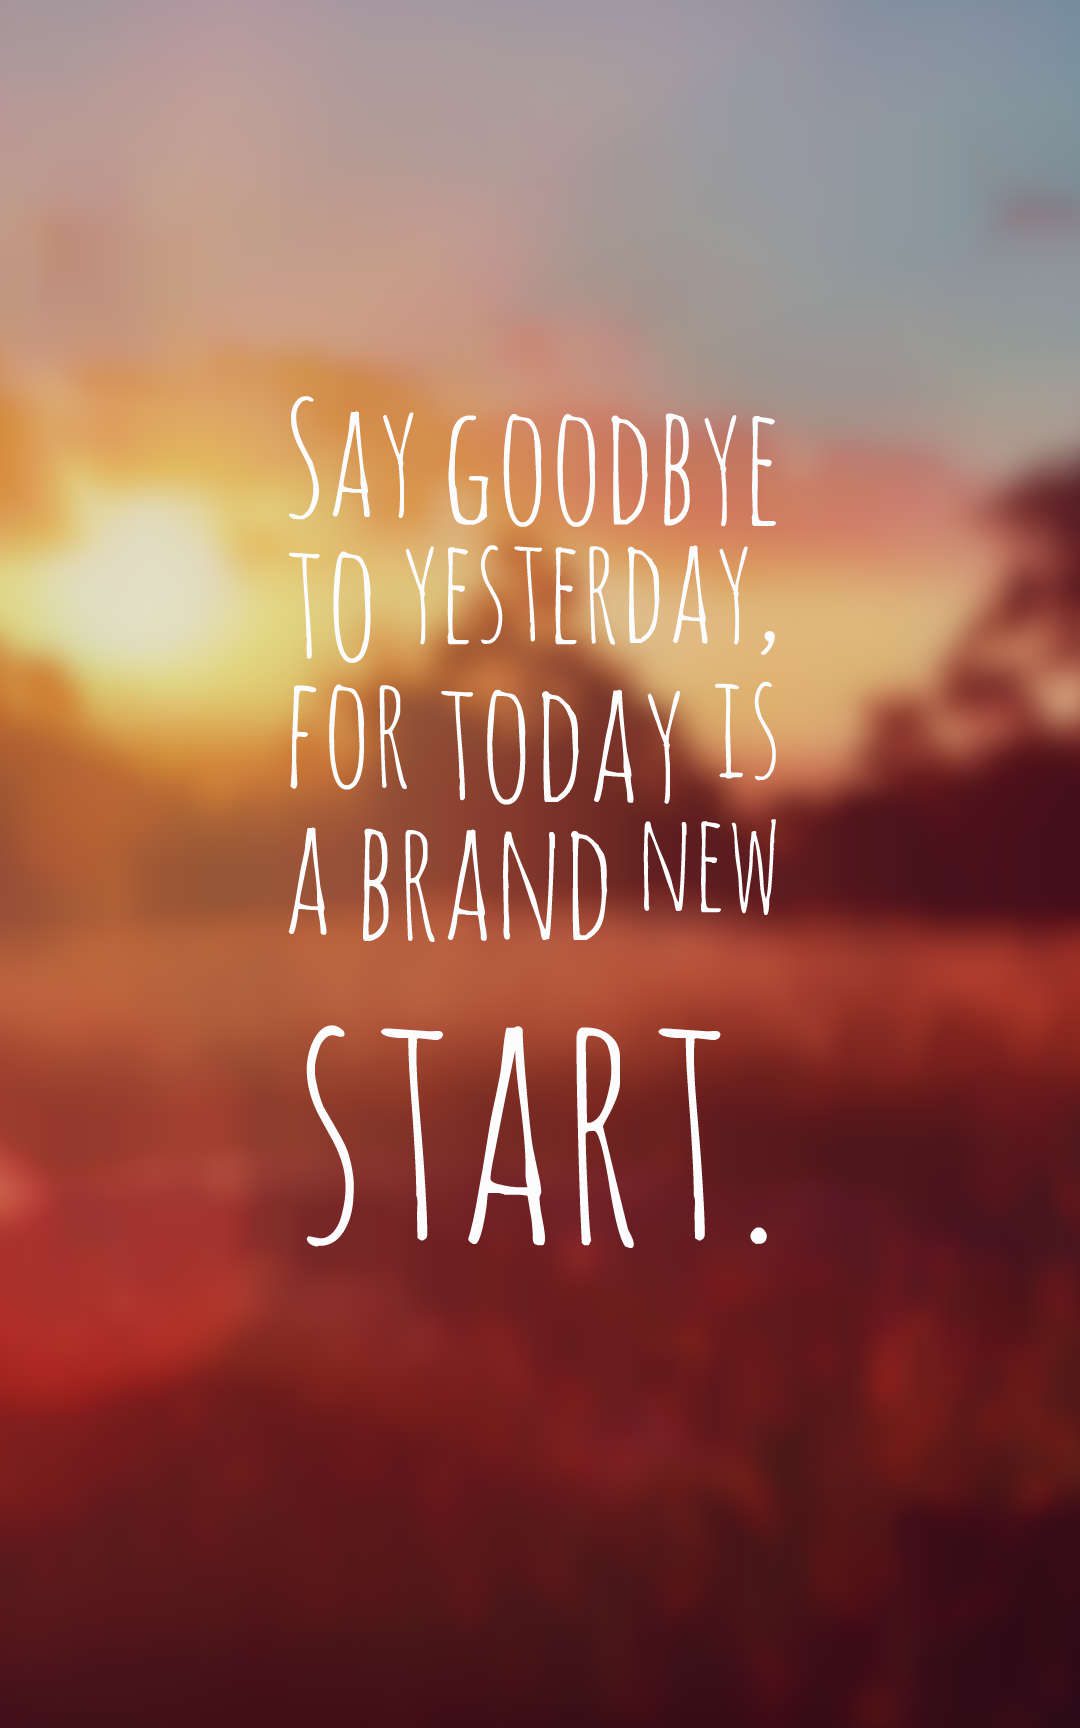 Say goodbye to yesterday, for today is a brand new start.